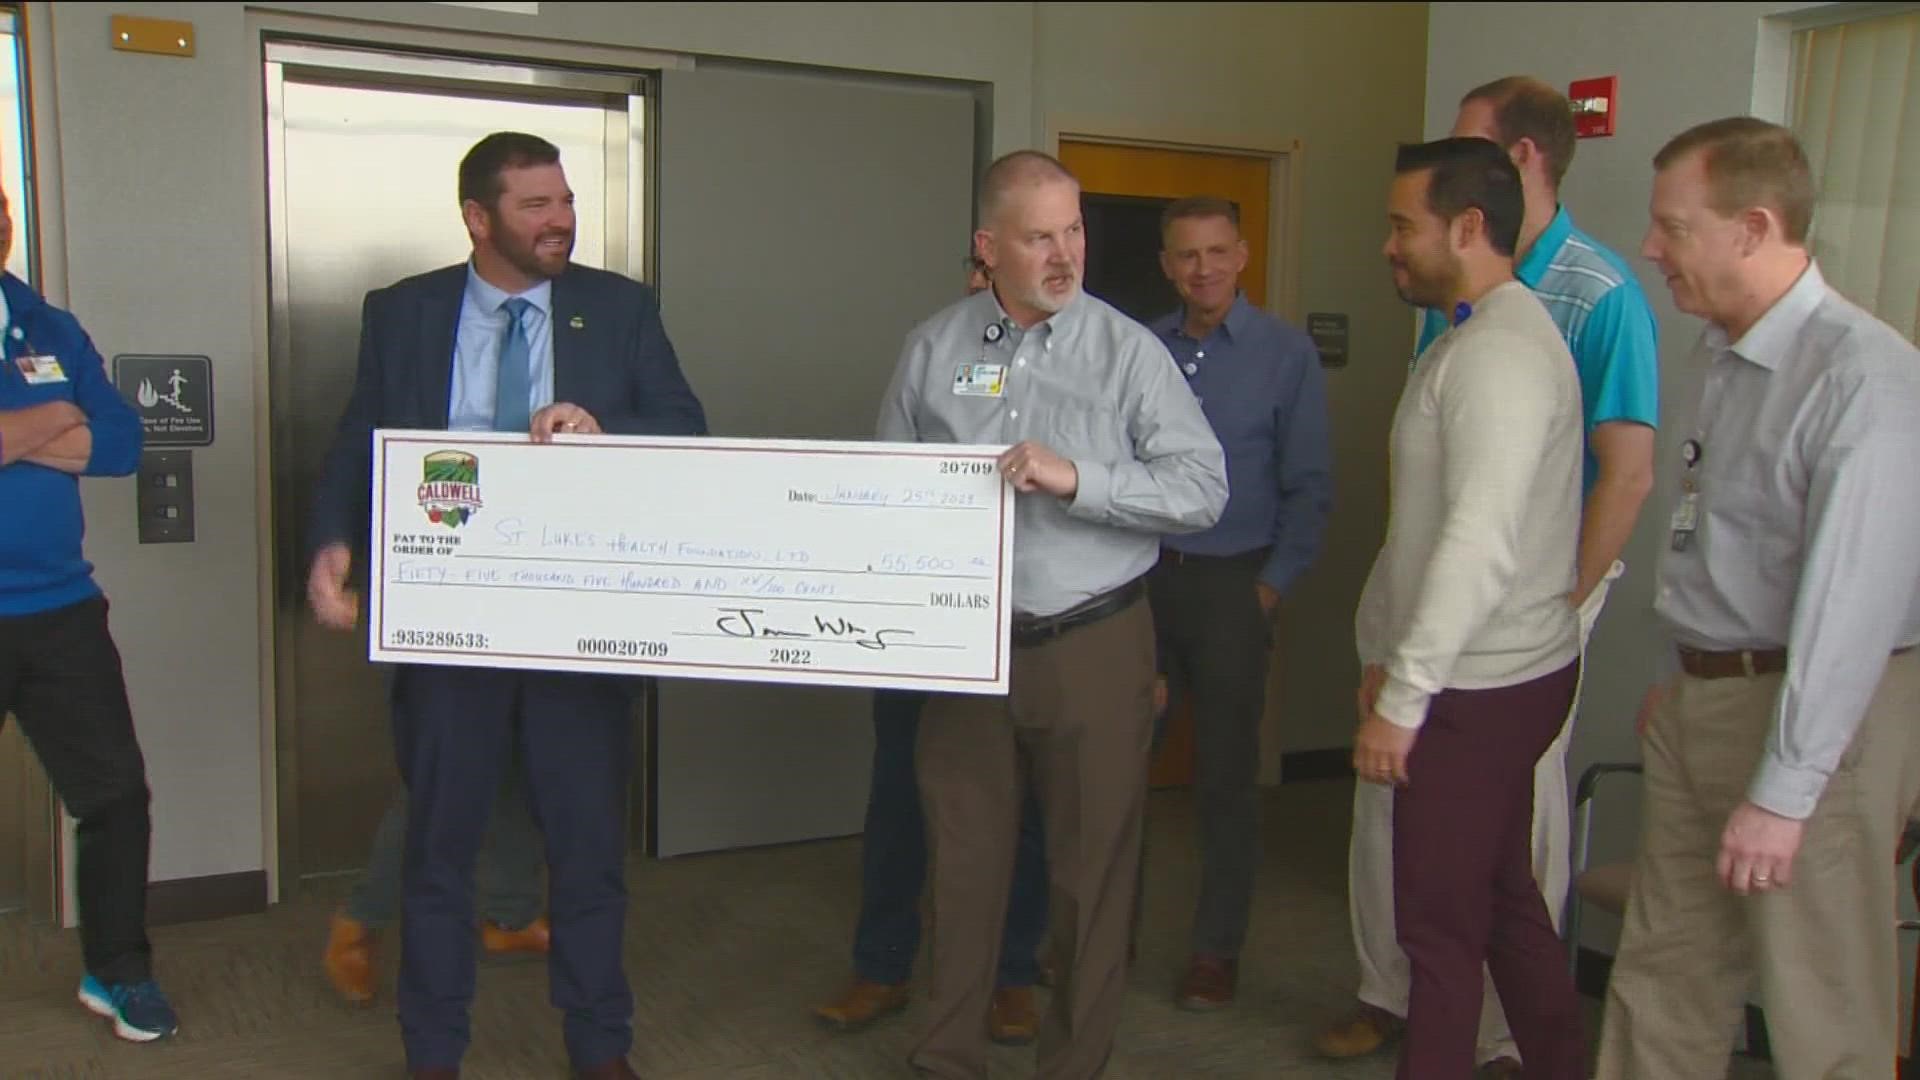 Caldwell Mayor Jarom Wagoner spent several weeks at the rehab center in 2021 after undergoing surgery for a brain tumor. He presented St. Luke's the check Wednesday.